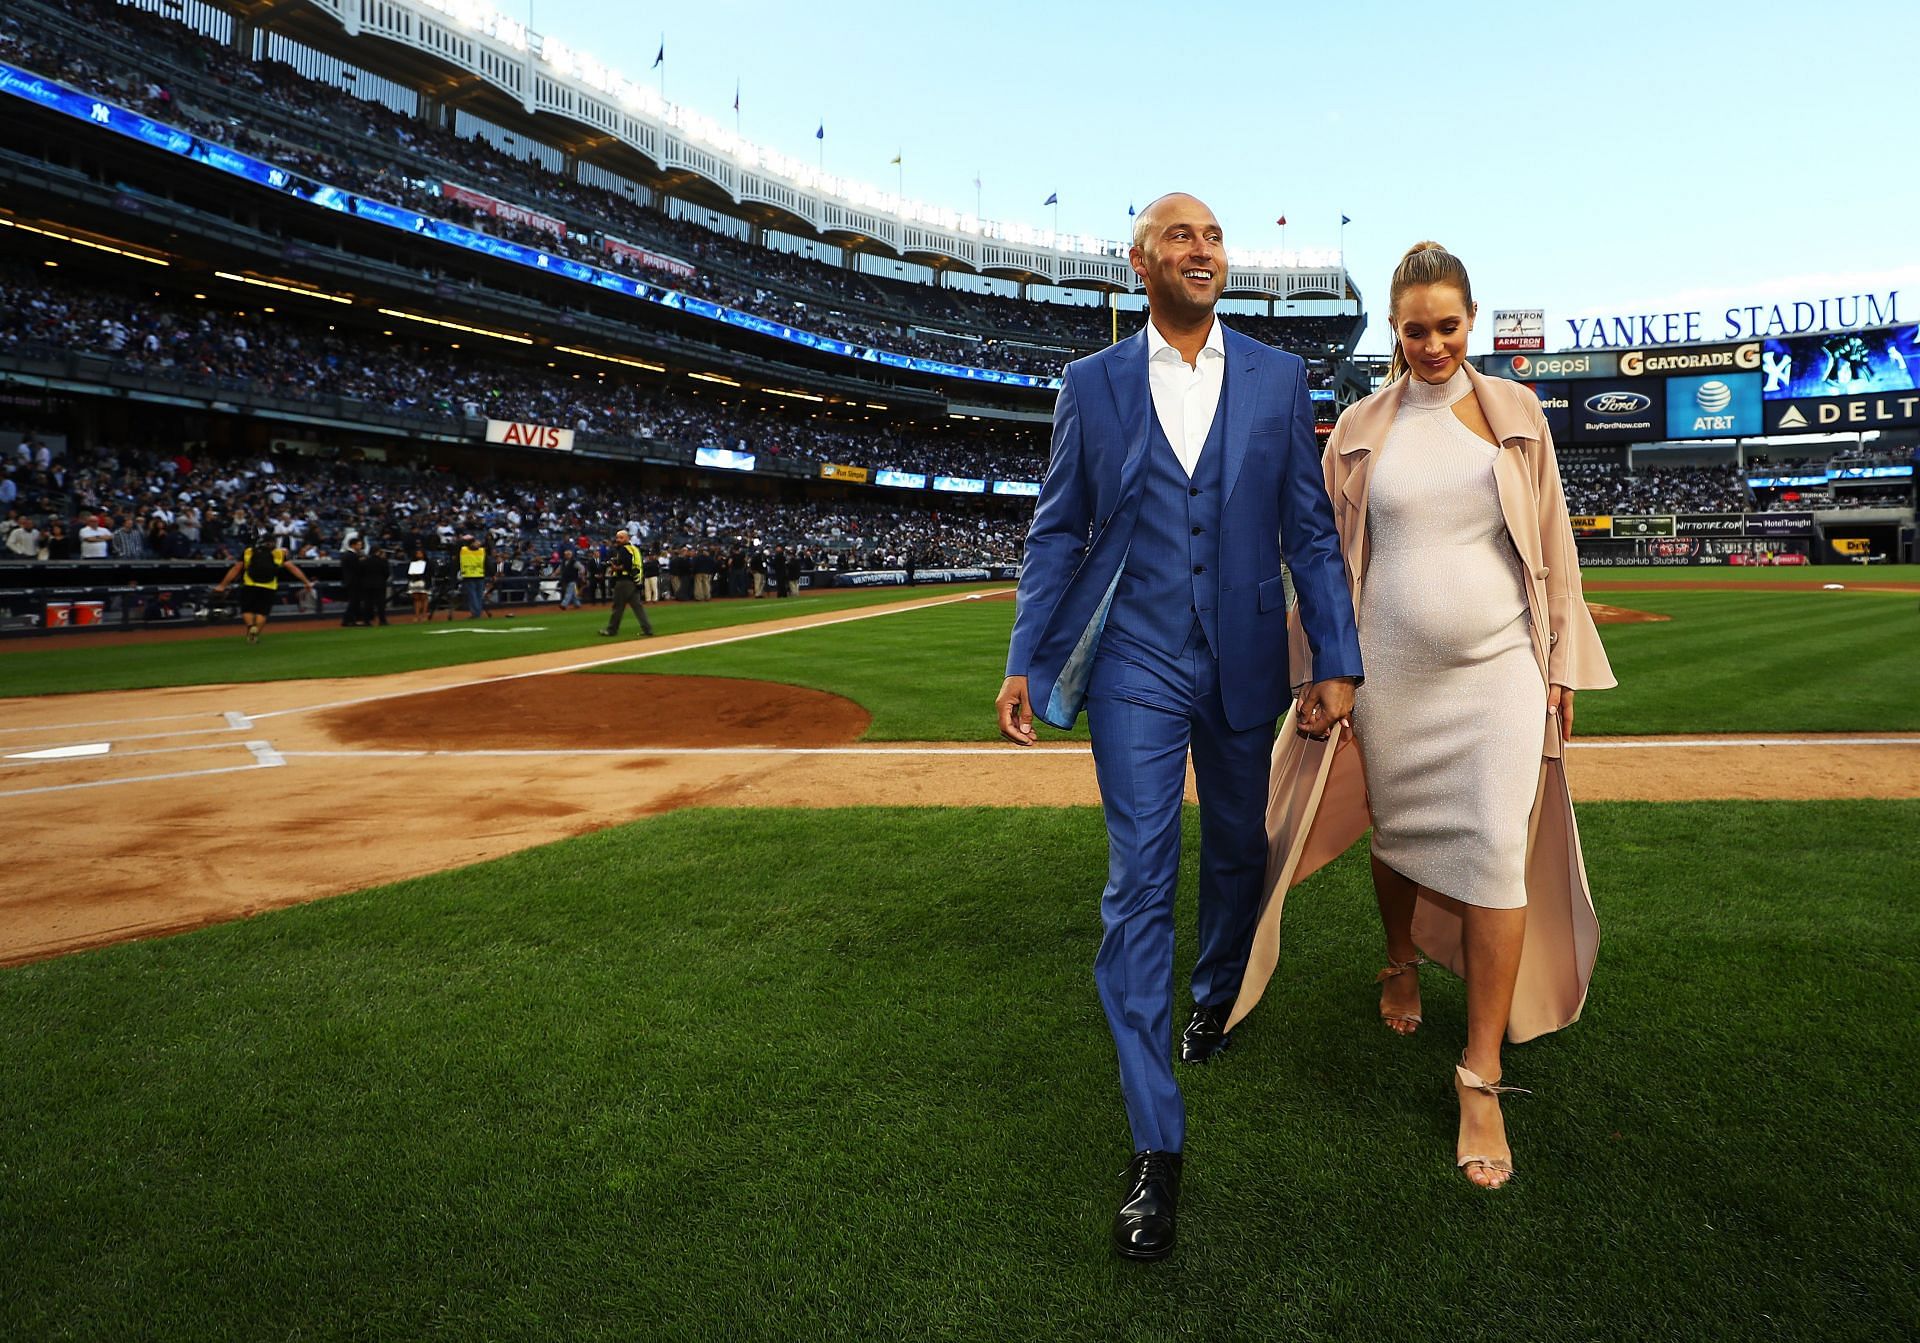 How many girlfriends did Derek Jeter have before getting hitched to  supermodel Hannah Davis?